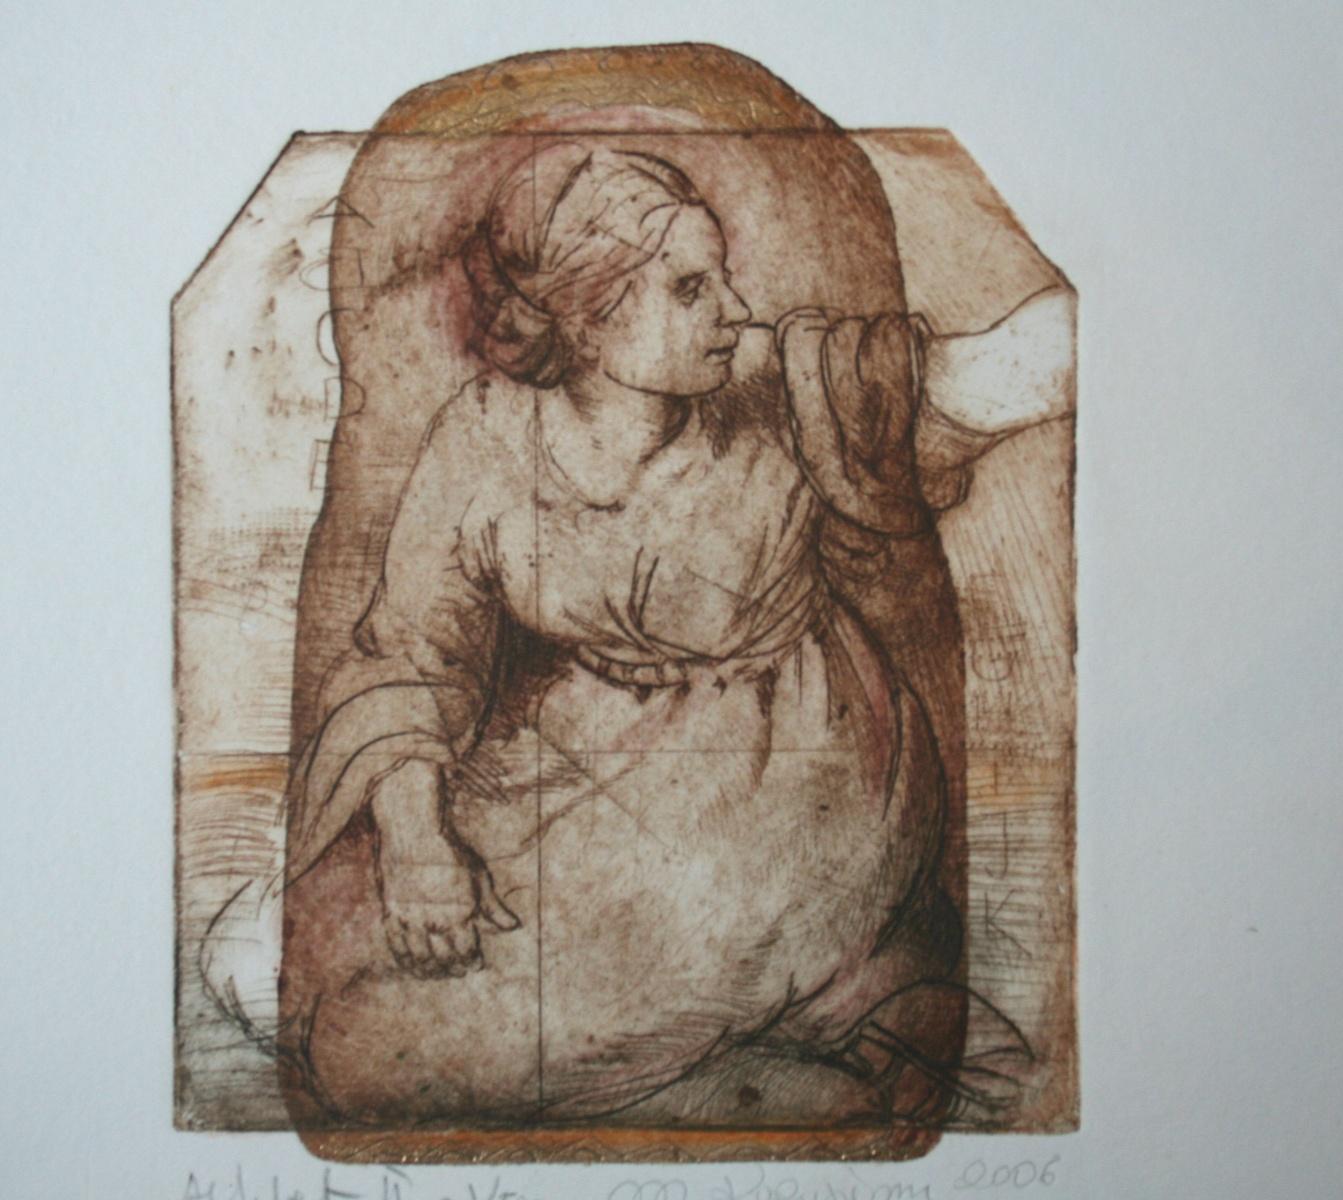 Alphabet - Contemporary art, Figurative print, Old masters inspired - Print by Maria Korusiewicz